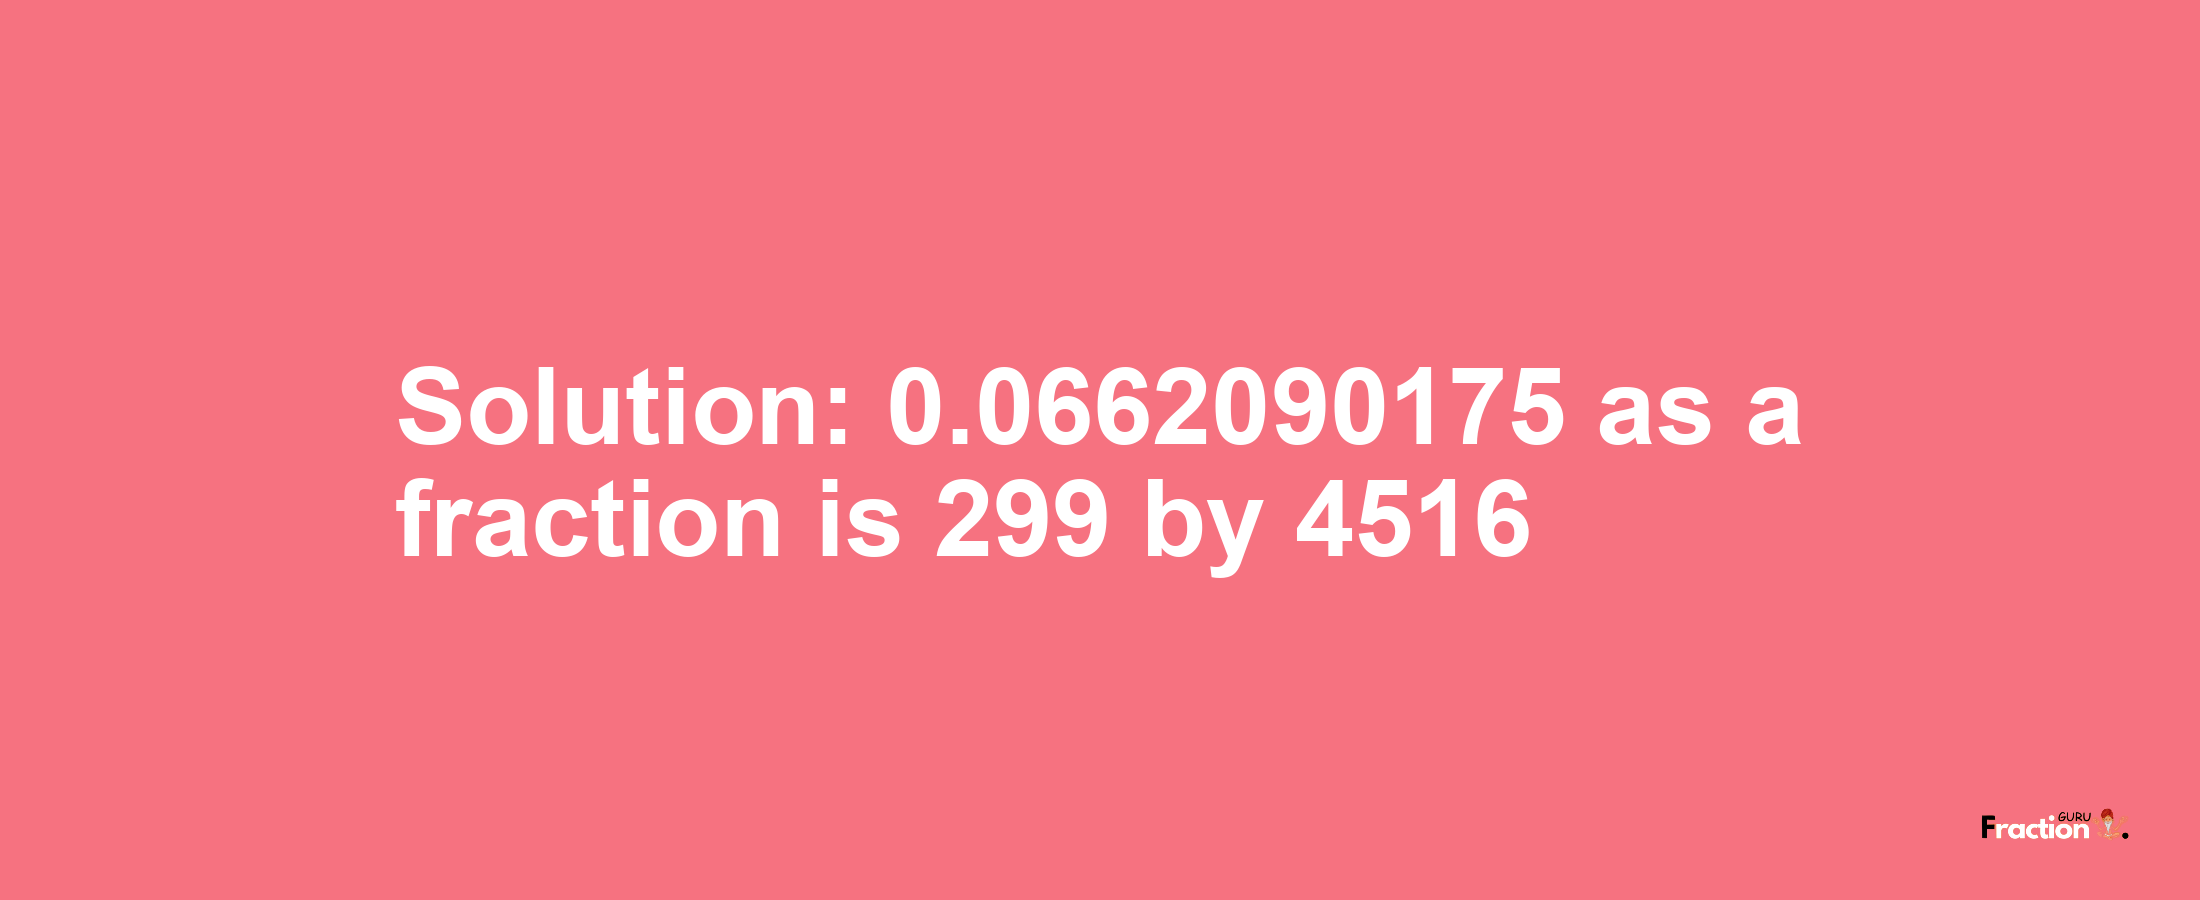 Solution:0.0662090175 as a fraction is 299/4516